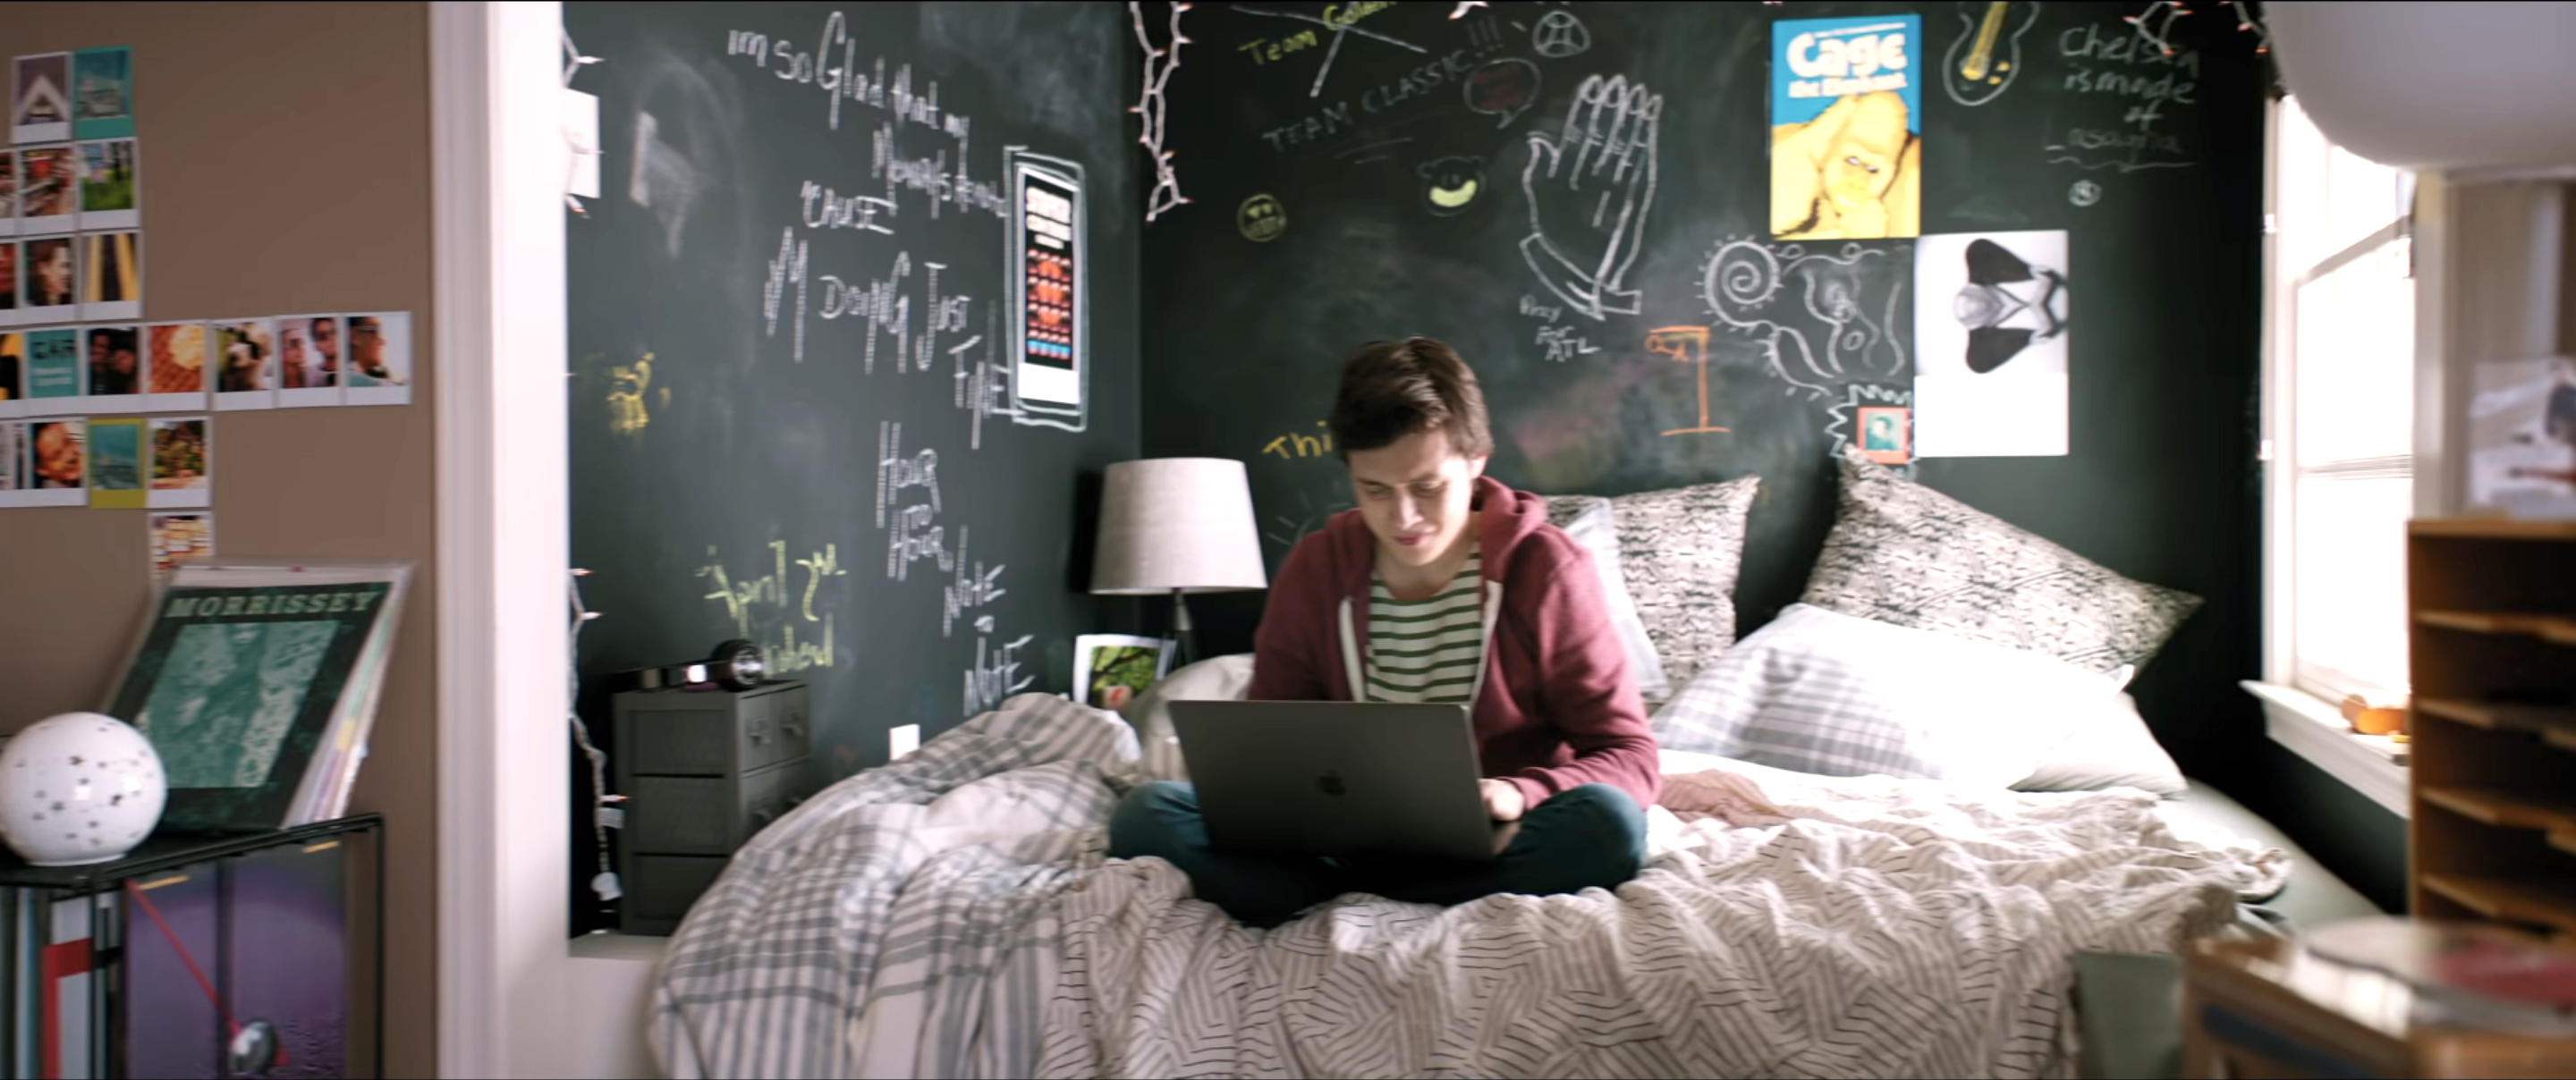 a woman sitting on a bed with chalkboard walls behind her